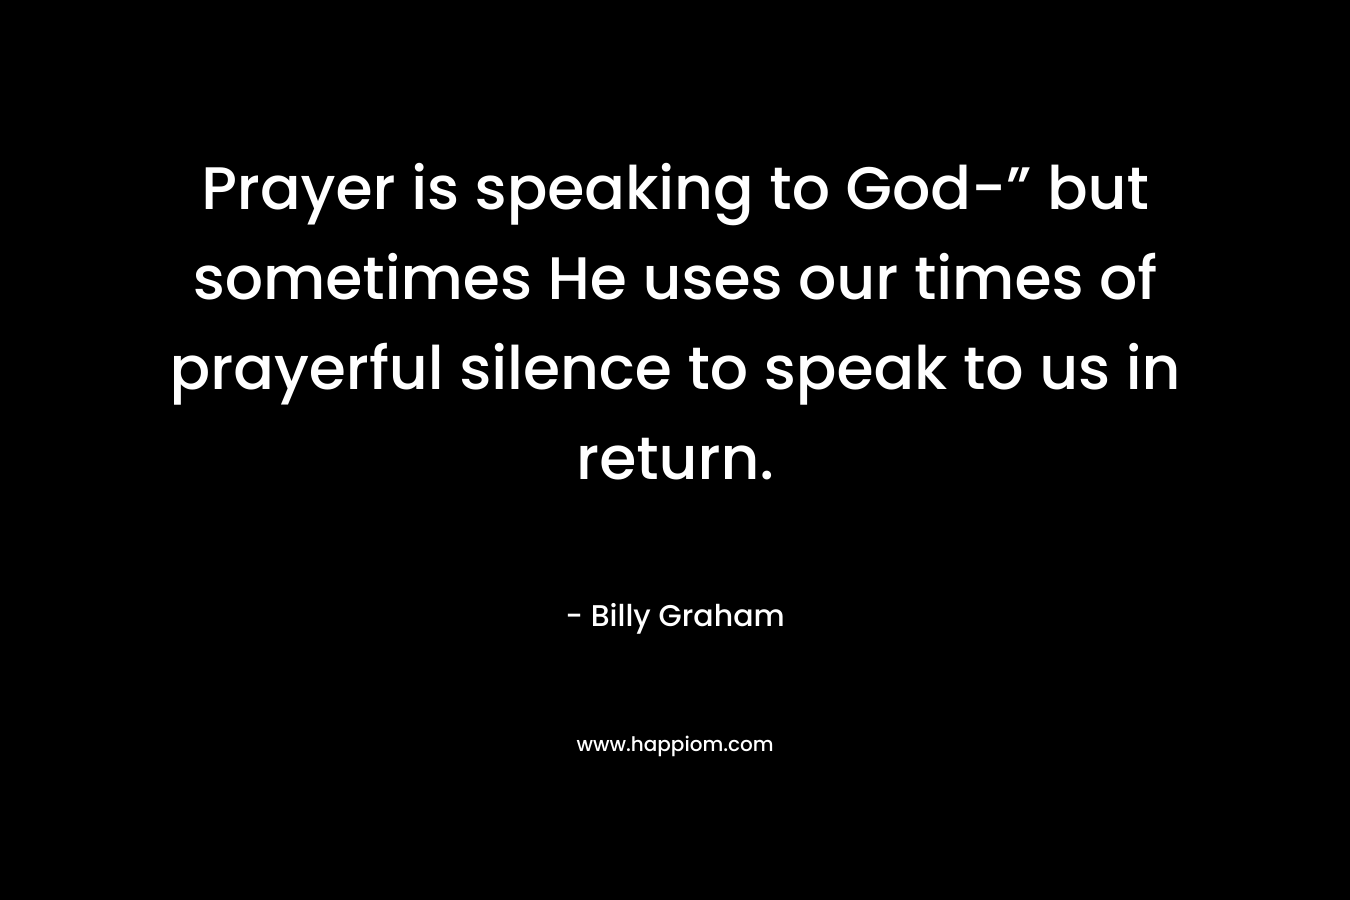 Prayer is speaking to God-” but sometimes He uses our times of prayerful silence to speak to us in return.